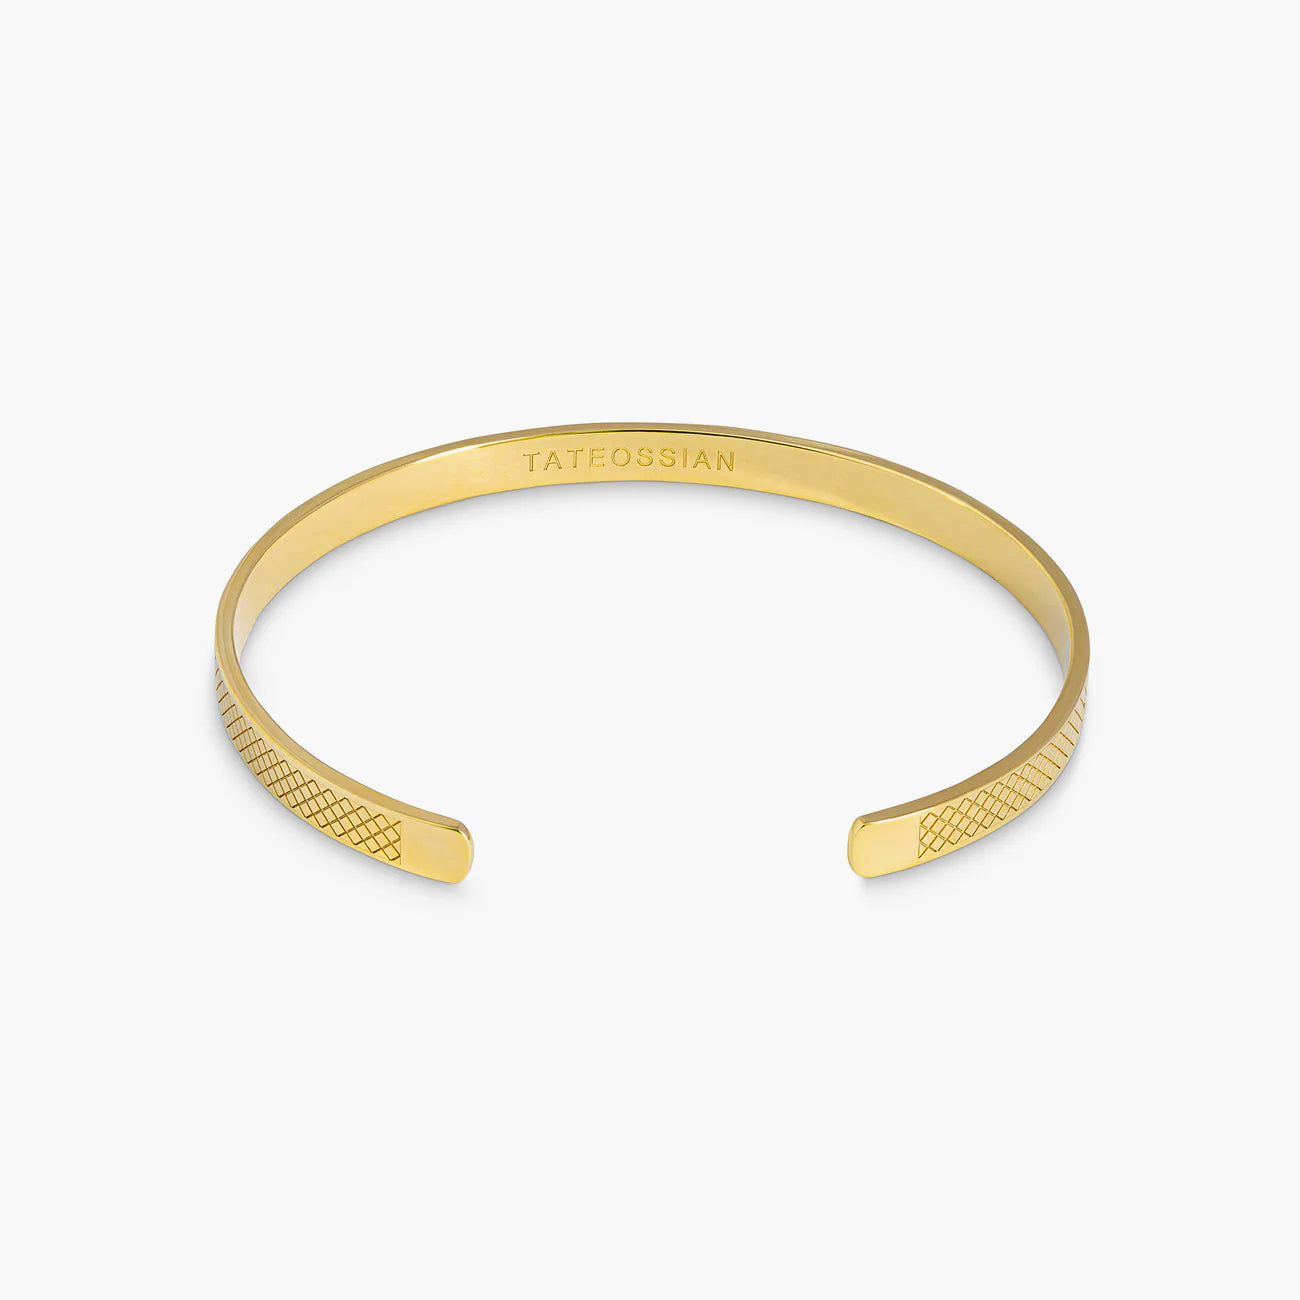 Yellow gold plated sterling silver Hallmark bangle